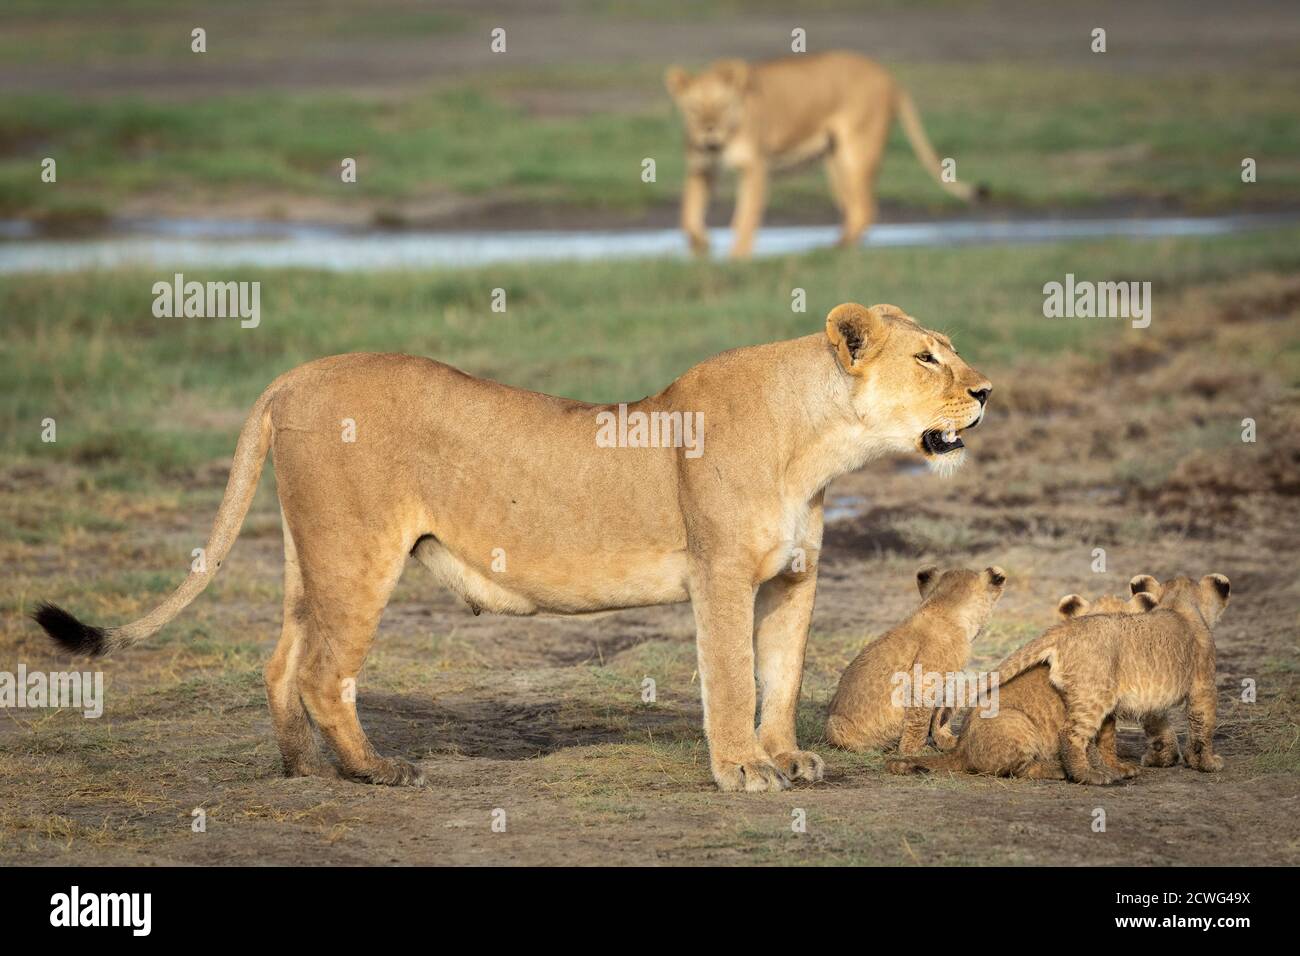 Lioness and her three baby lions standing together in Ndutu in Tanzania Stock Photo